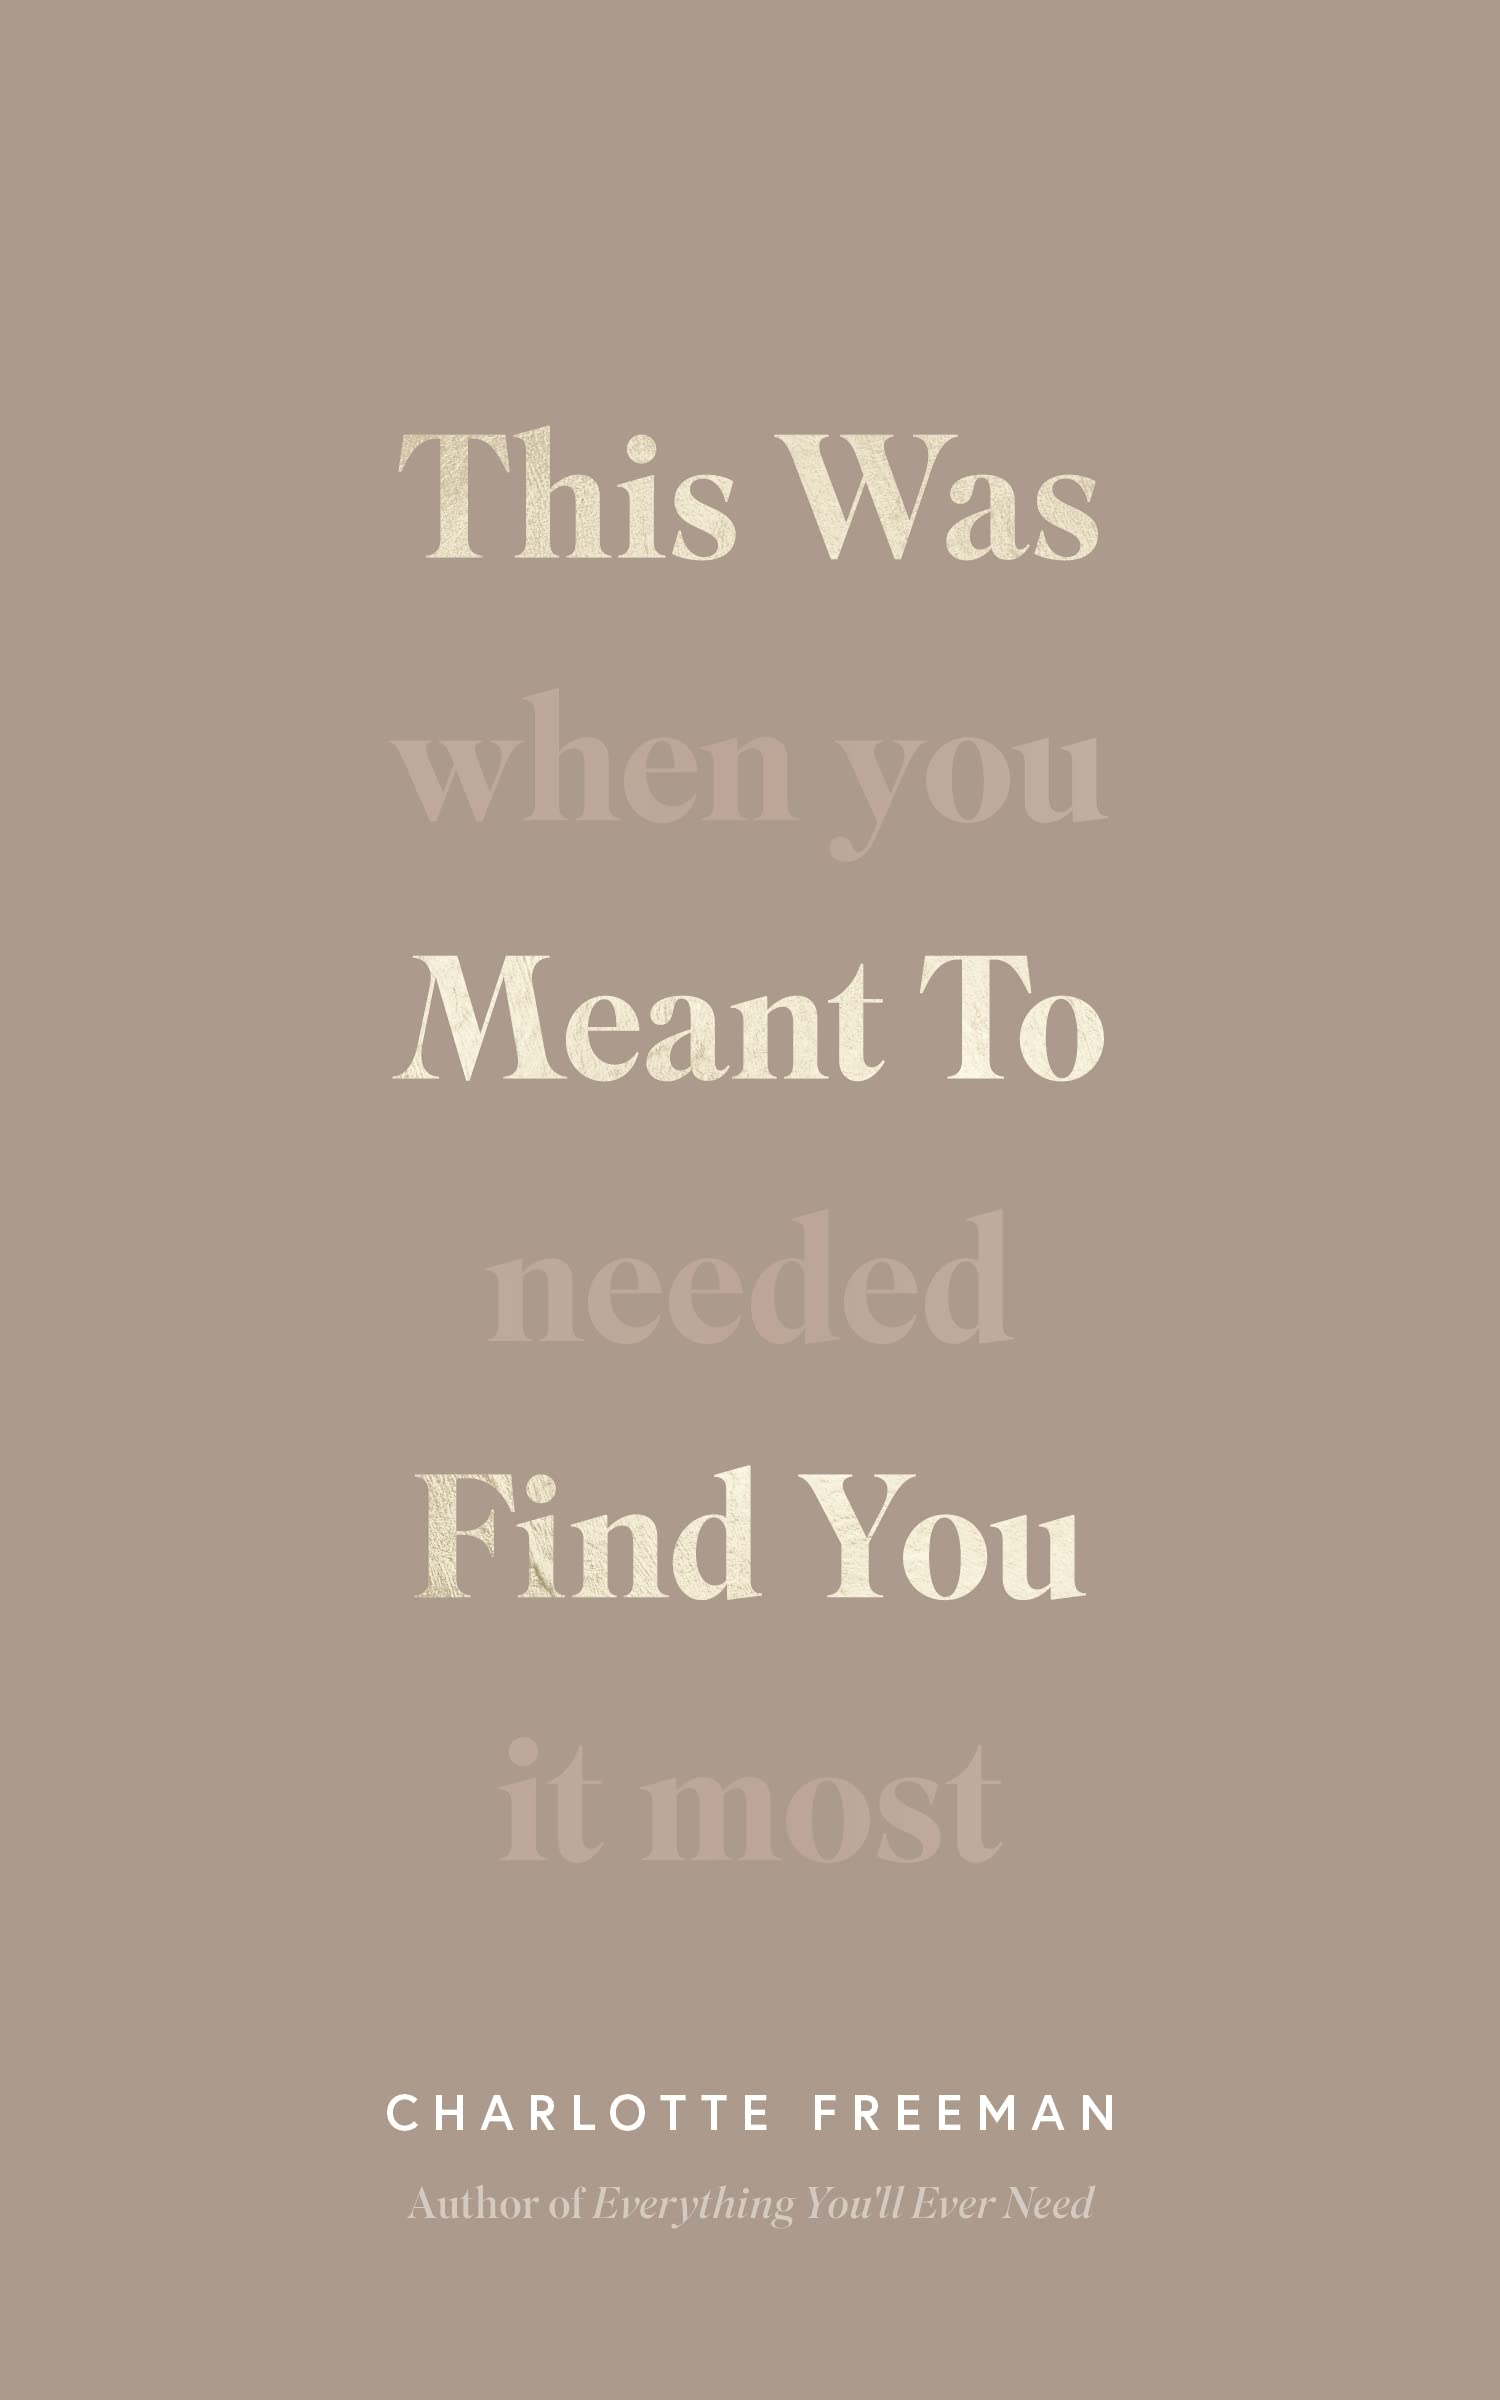 This Was Meant to Find You: When You Needed It Most ( Paparback ) By Charlotte Freeman